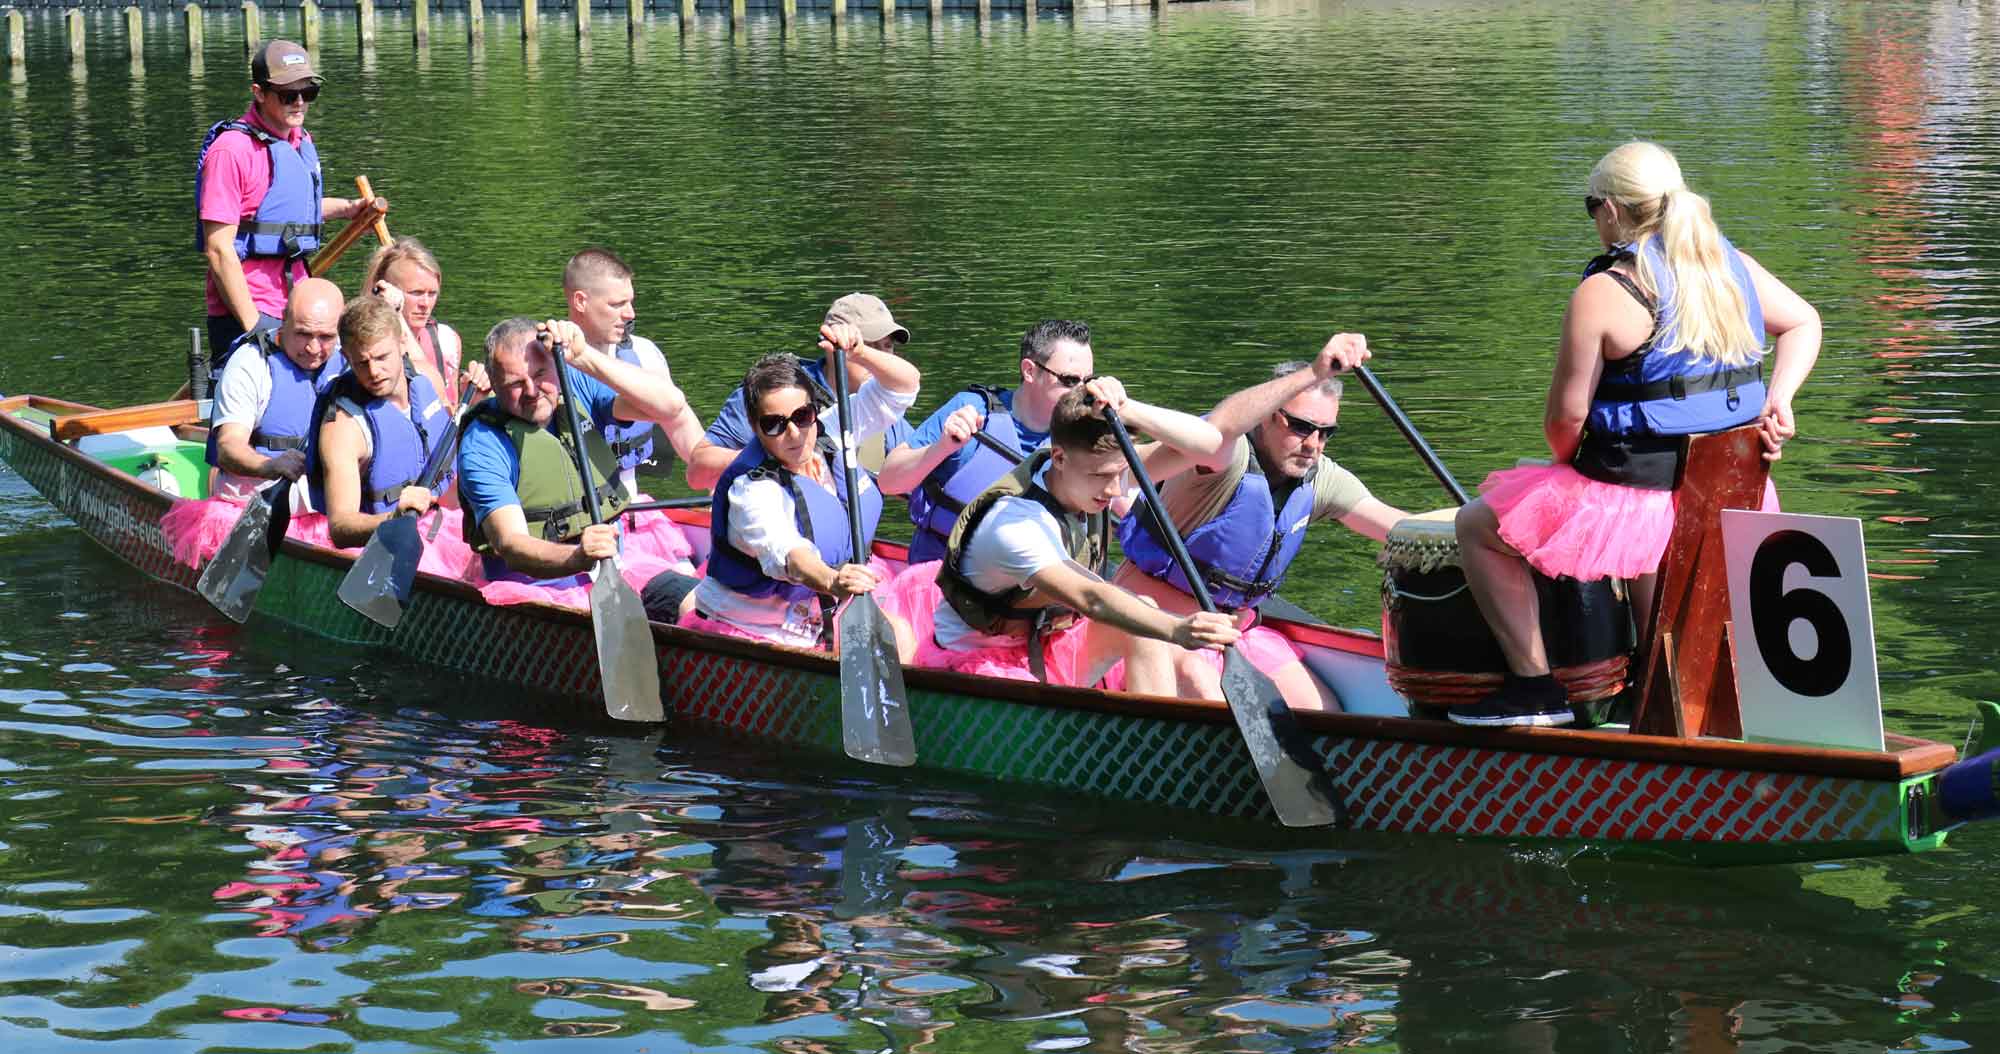 Competitors taking part in last year’s Leeds Dragon Boat Race at Roundhay Park